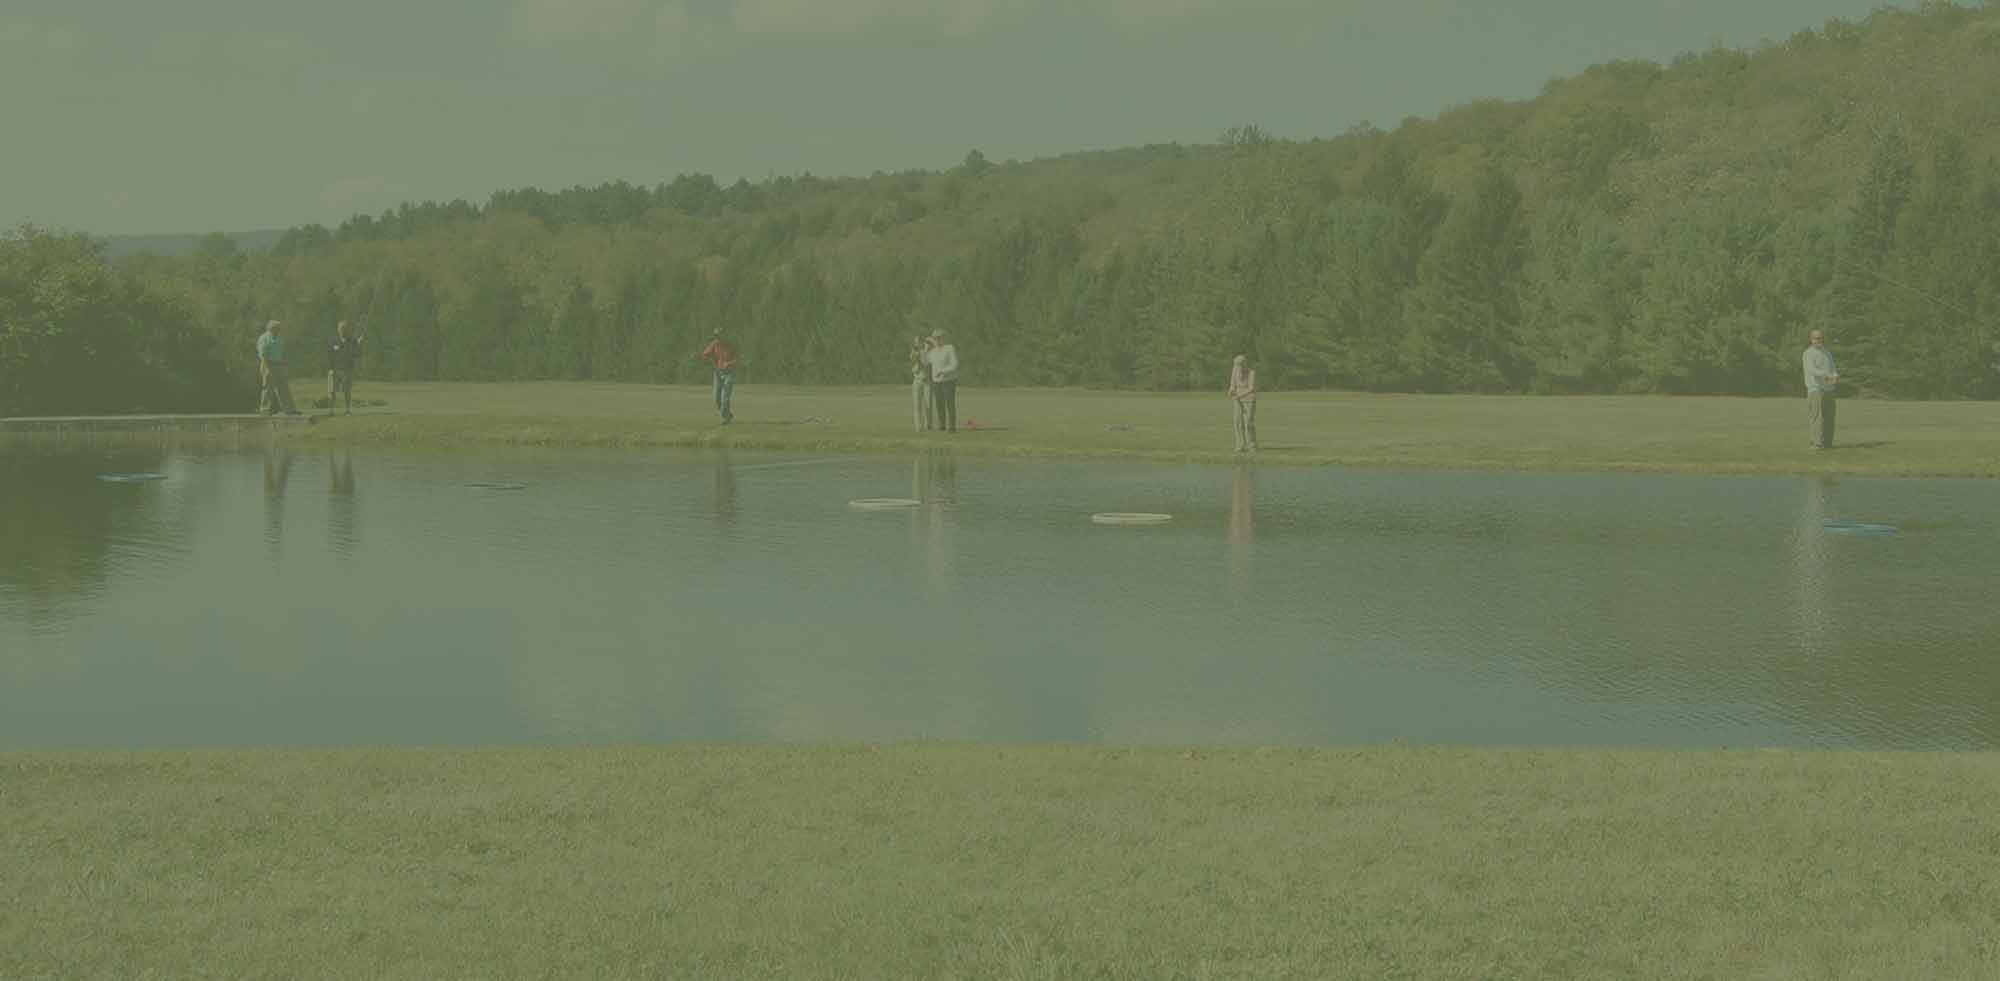 Casting Pond at the Wulff Fly Fishing School, Photo by Mike Hosier